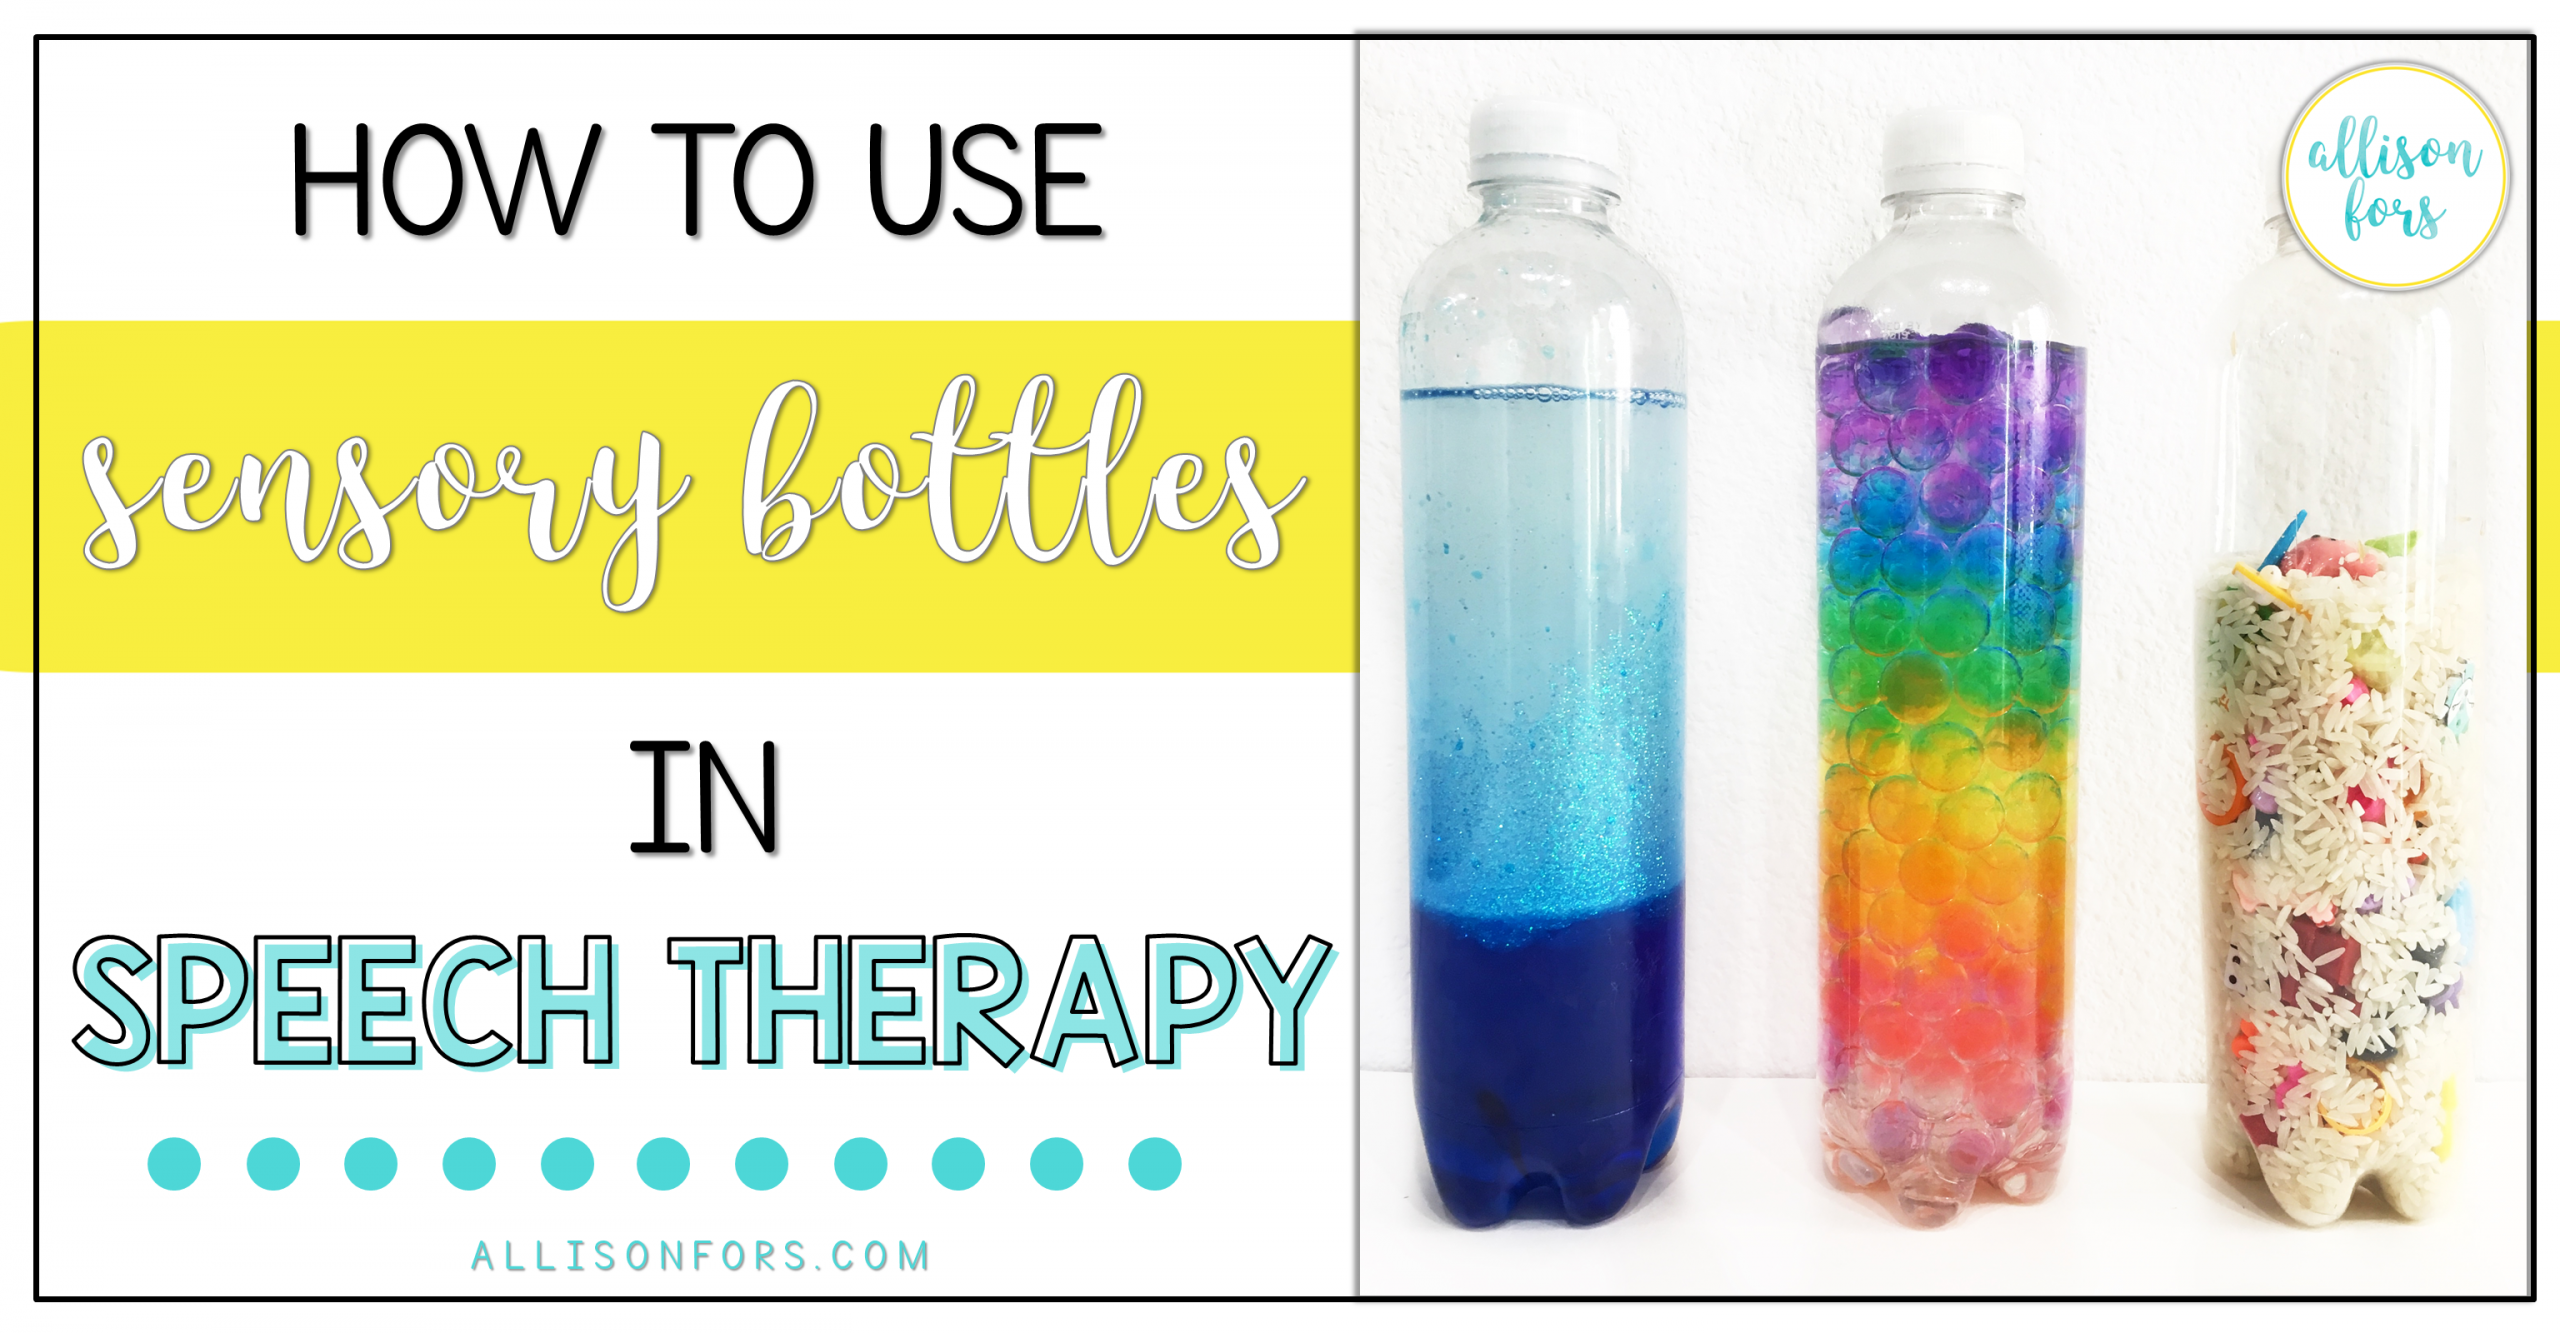 How to Use Sensory Bottles in Speech Therapy